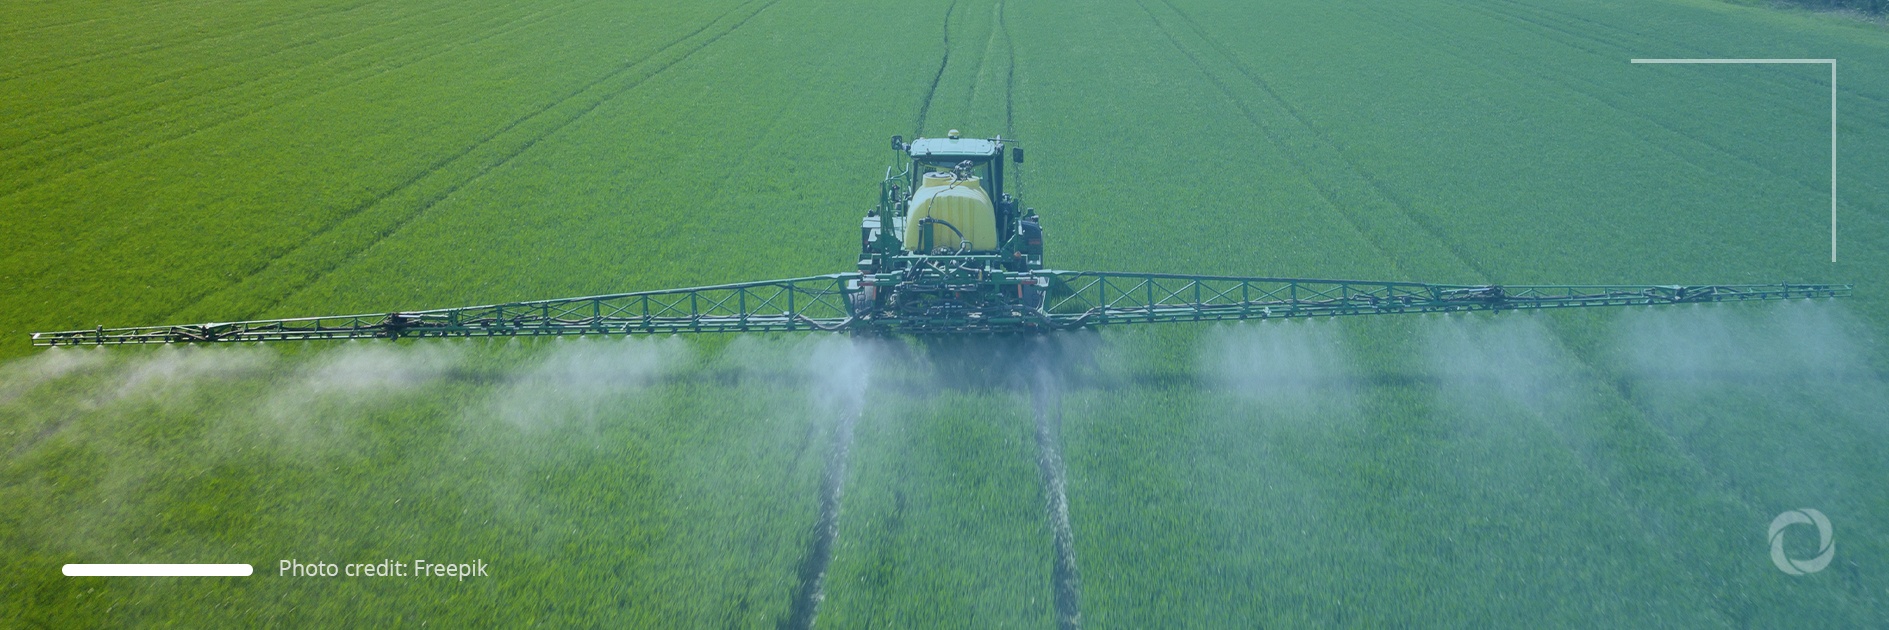 Brazil sets record for pesticide approval and seeks even more flexibility